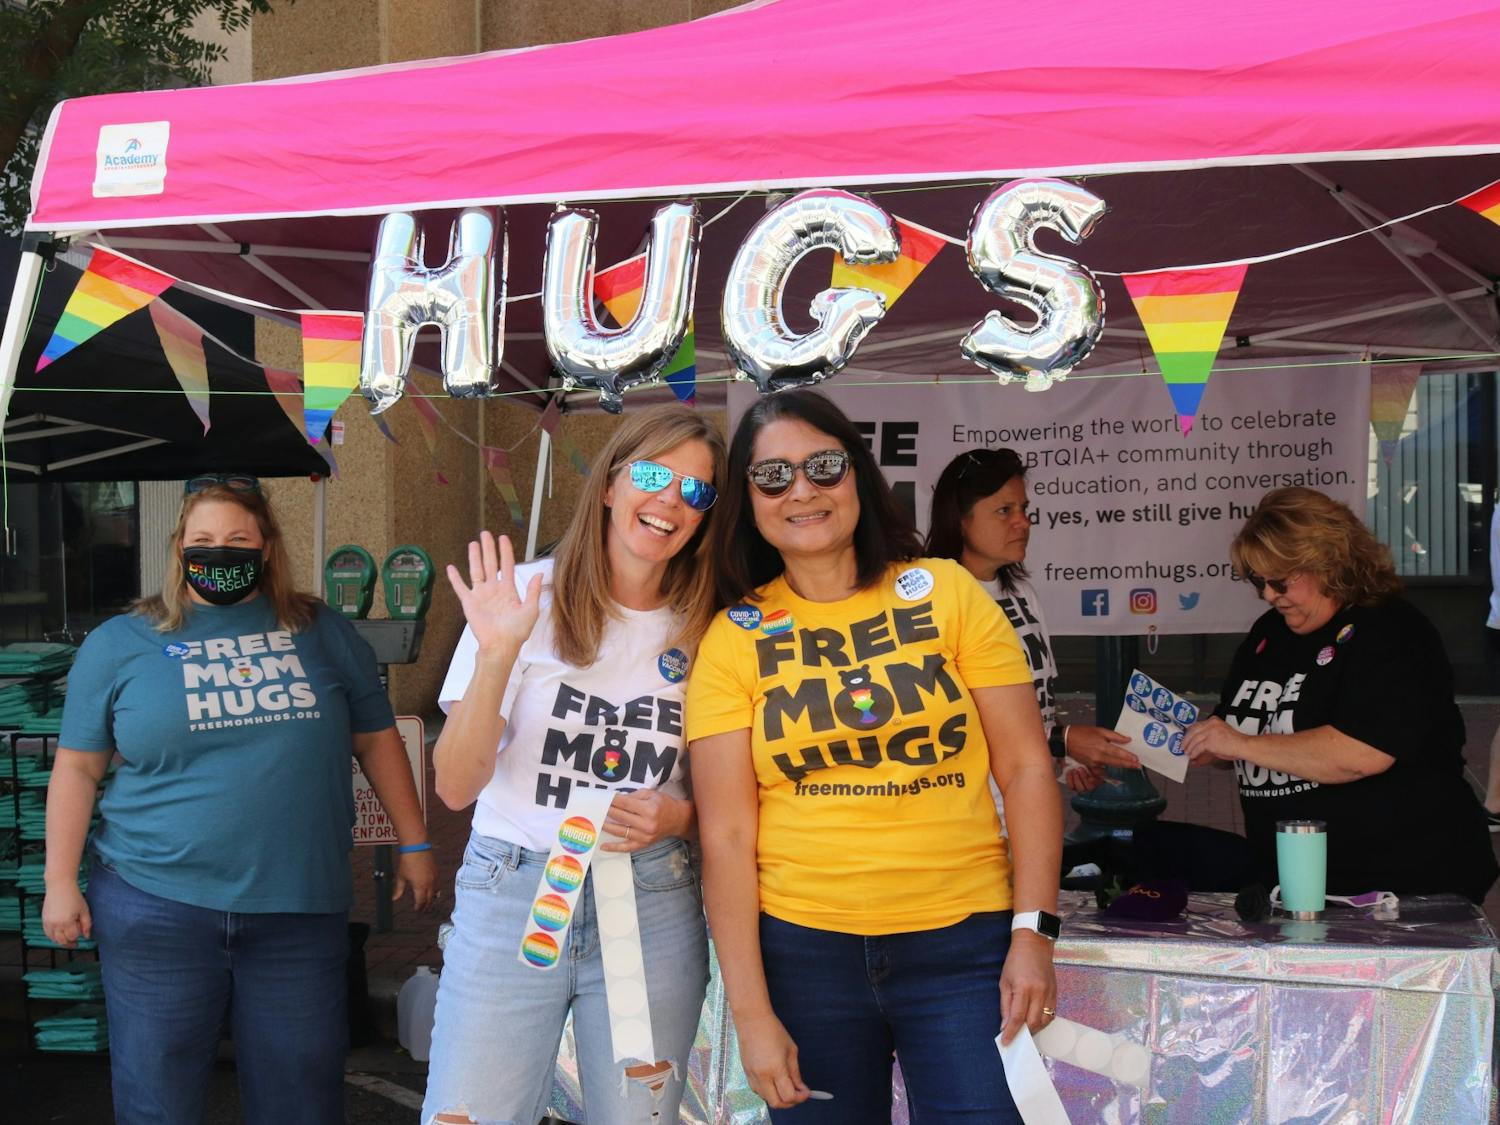 A group of women give out “free mom hugs,” offering a welcoming shoulder for LGBTQIA+ community members at the 2021 South Carolina Pride Festival, an event dedicated to celebrating the LGBTQIA+ community and advocating for LGBTQIA+ equality.